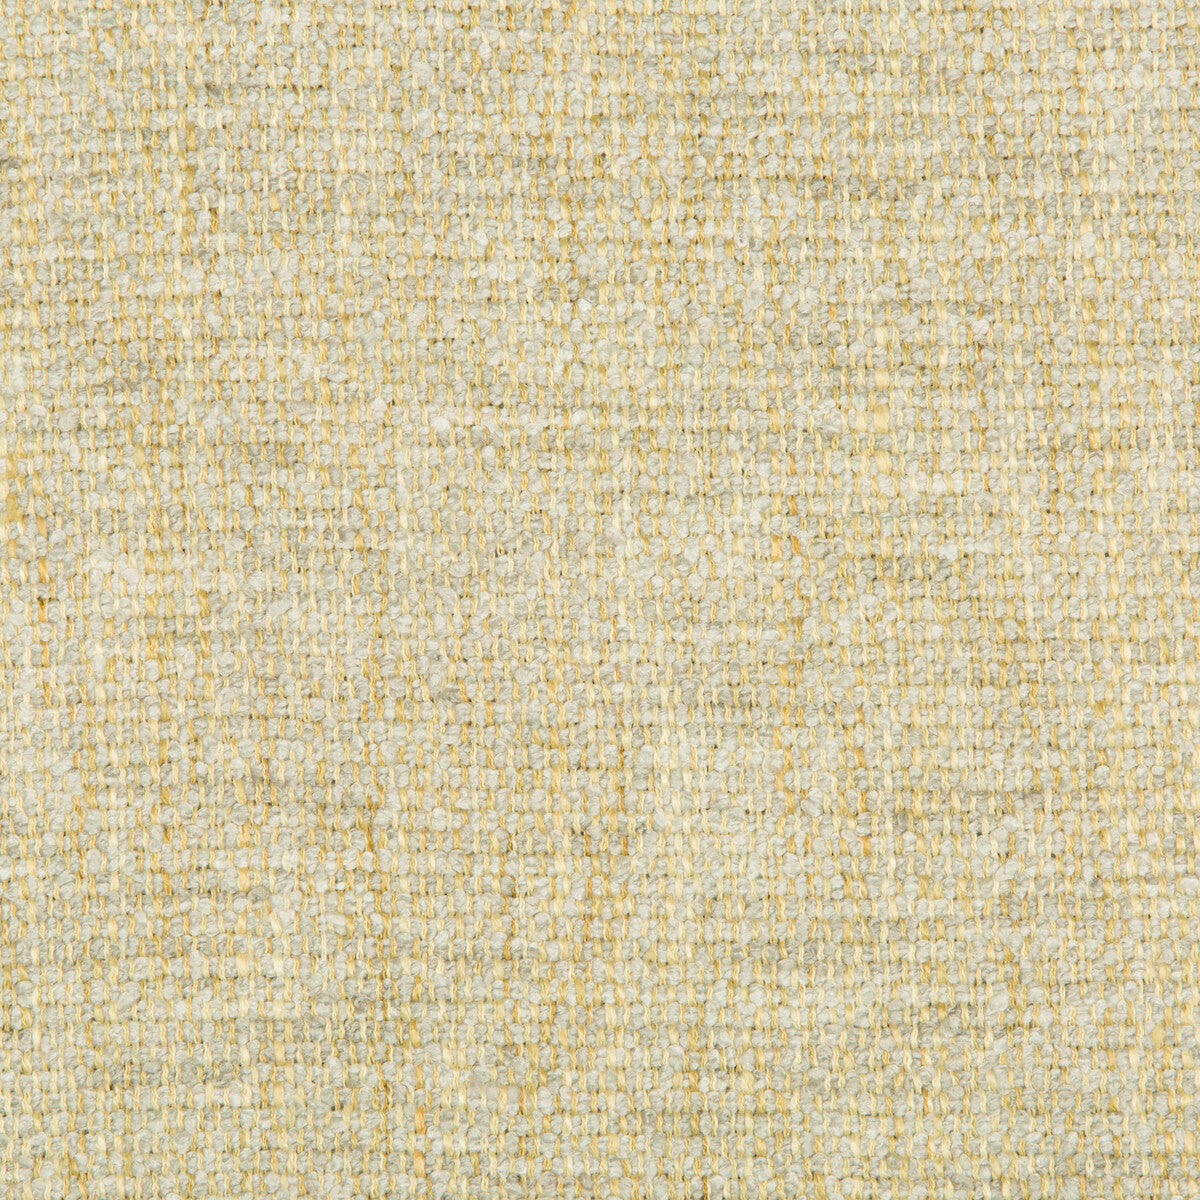 Rancho fabric in mineral color - pattern 34937.413.0 - by Kravet Couture in the Sue Firestone Malibu collection